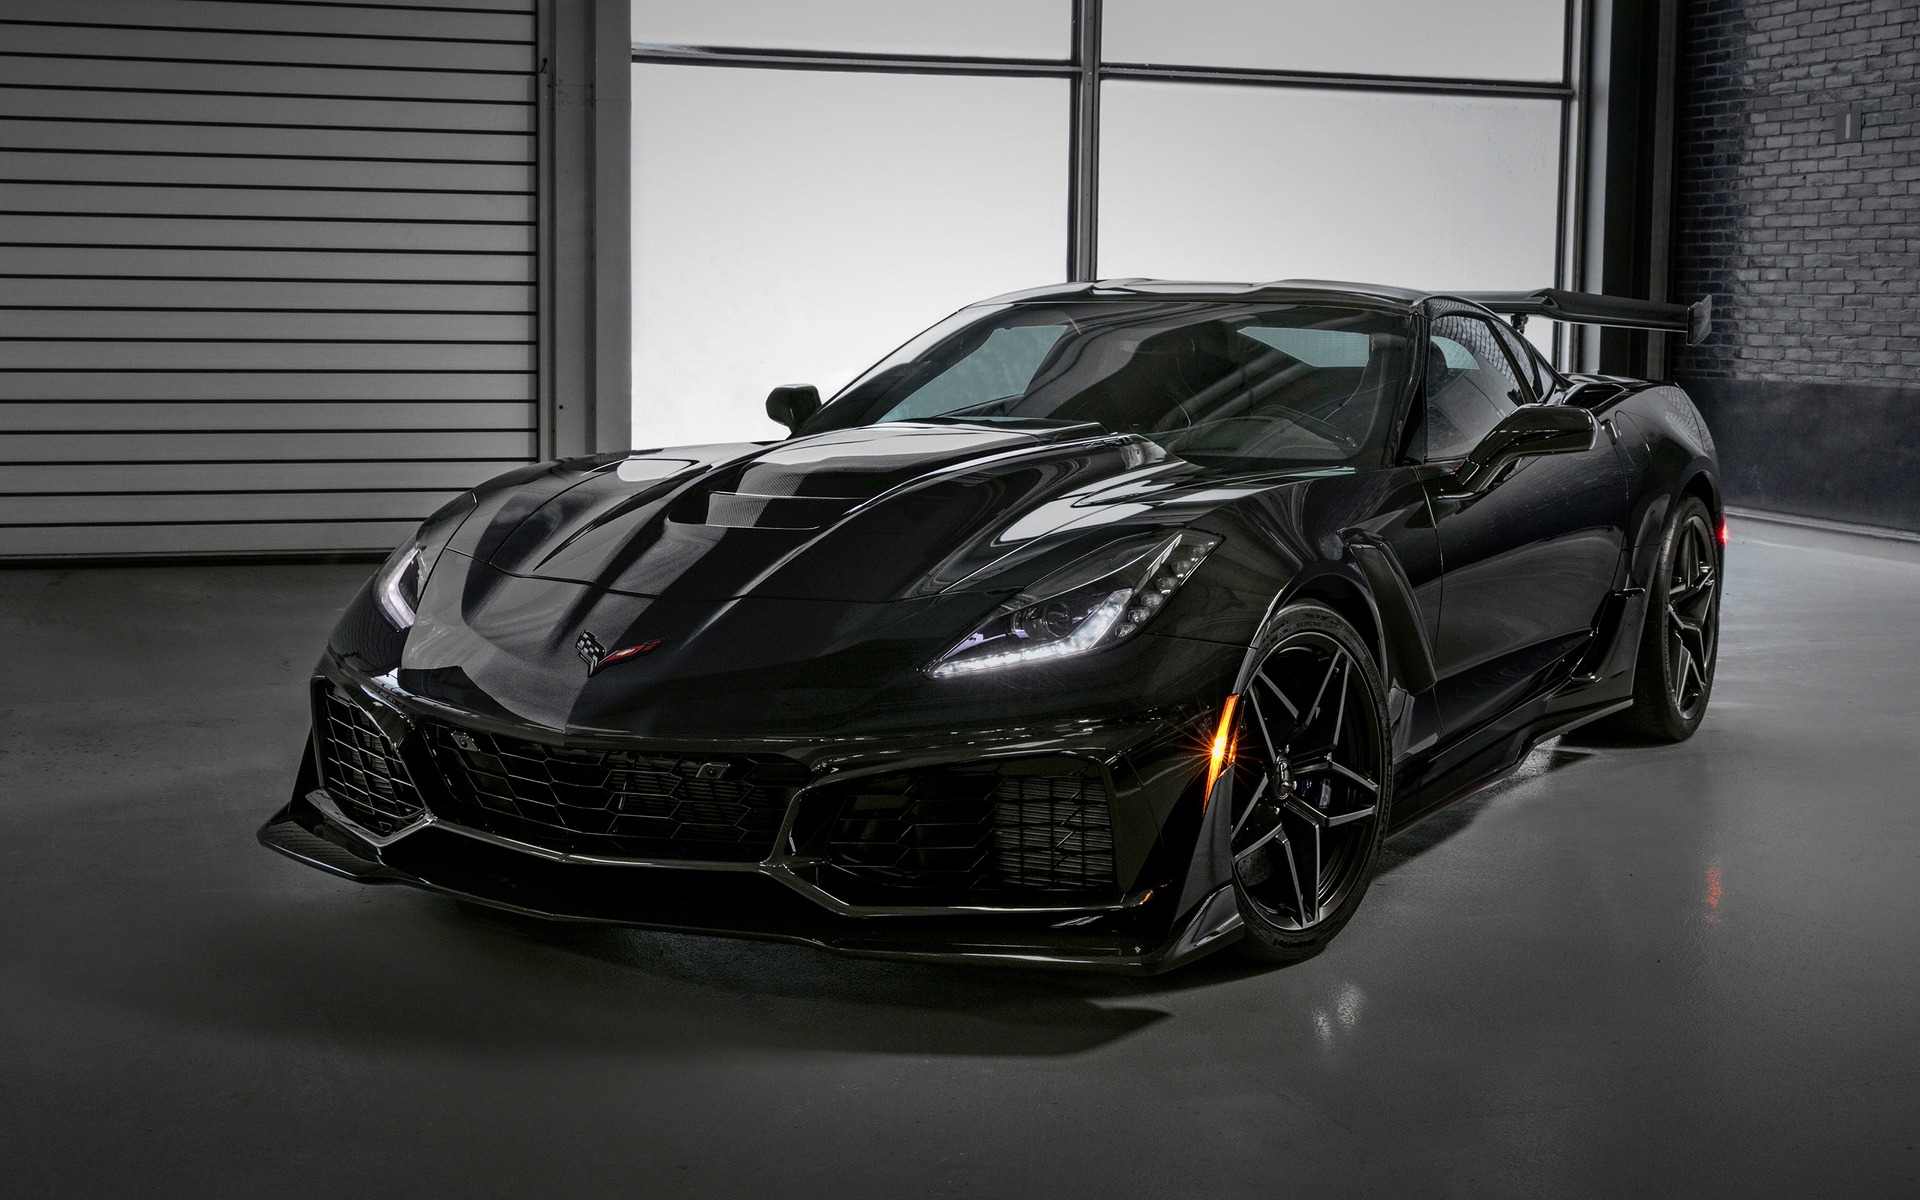 Five Things to Know About the 2019 Chevrolet Corvette - The Car Guide